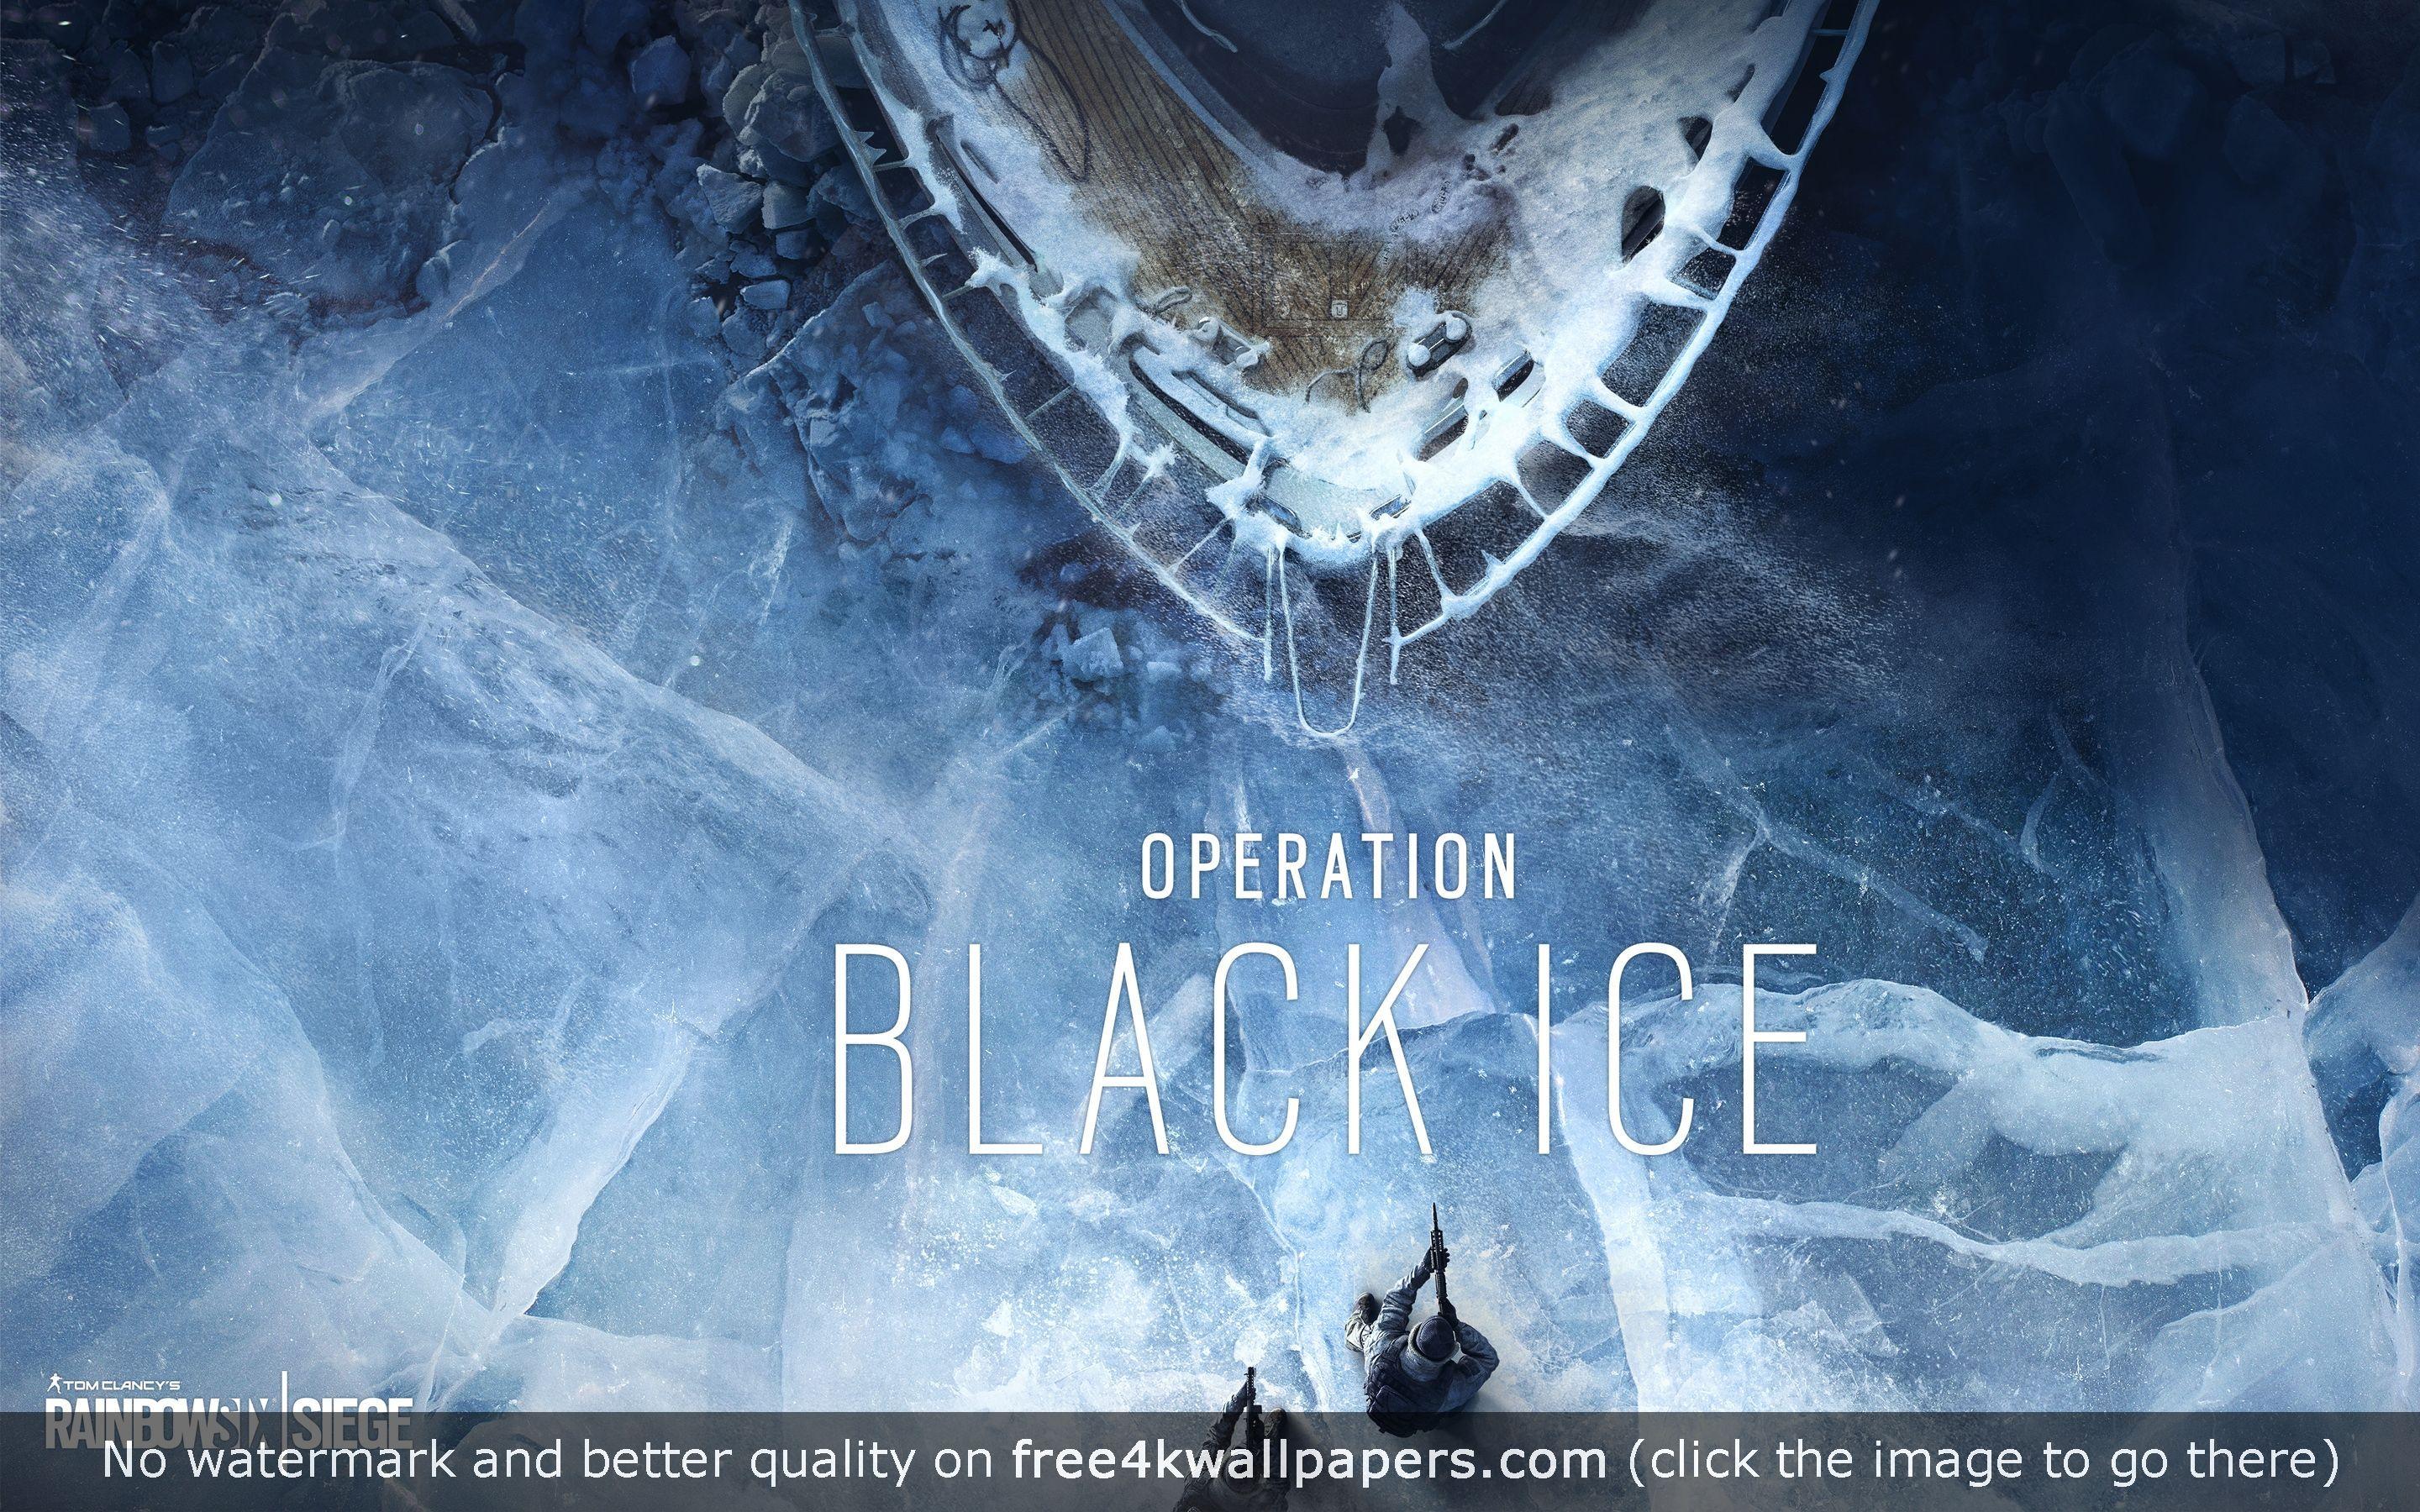 Black Ice Wallpapers Top Free Black Ice Backgrounds Wallpaperaccess